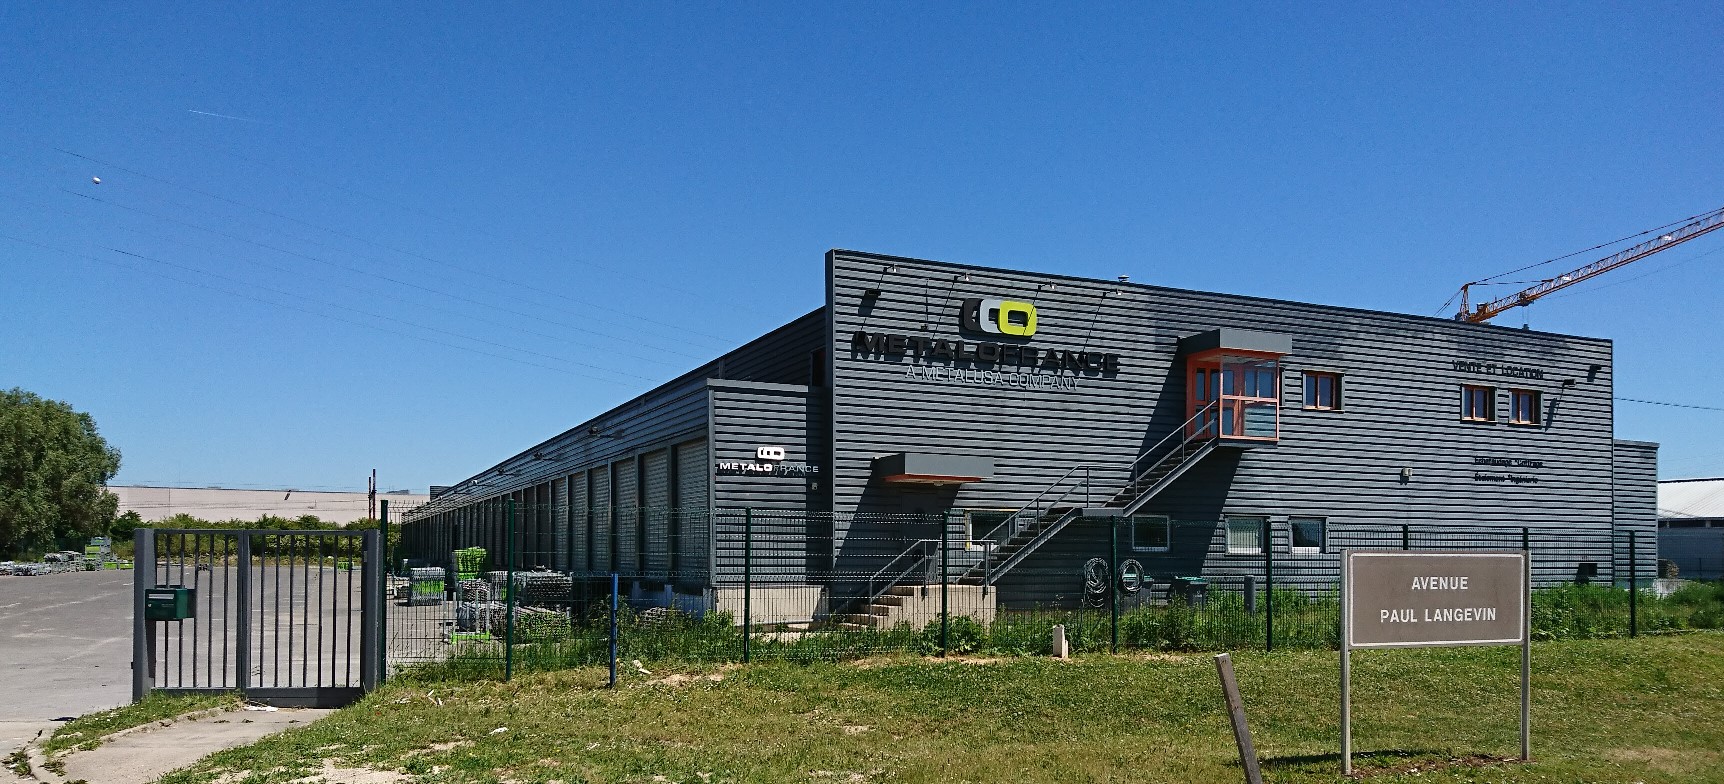 METALOFRANCE, a subsidiary of Metalusa, has invested one million and a half Euros in the new facilities in Moissy-Cramayel in the region of Île de France